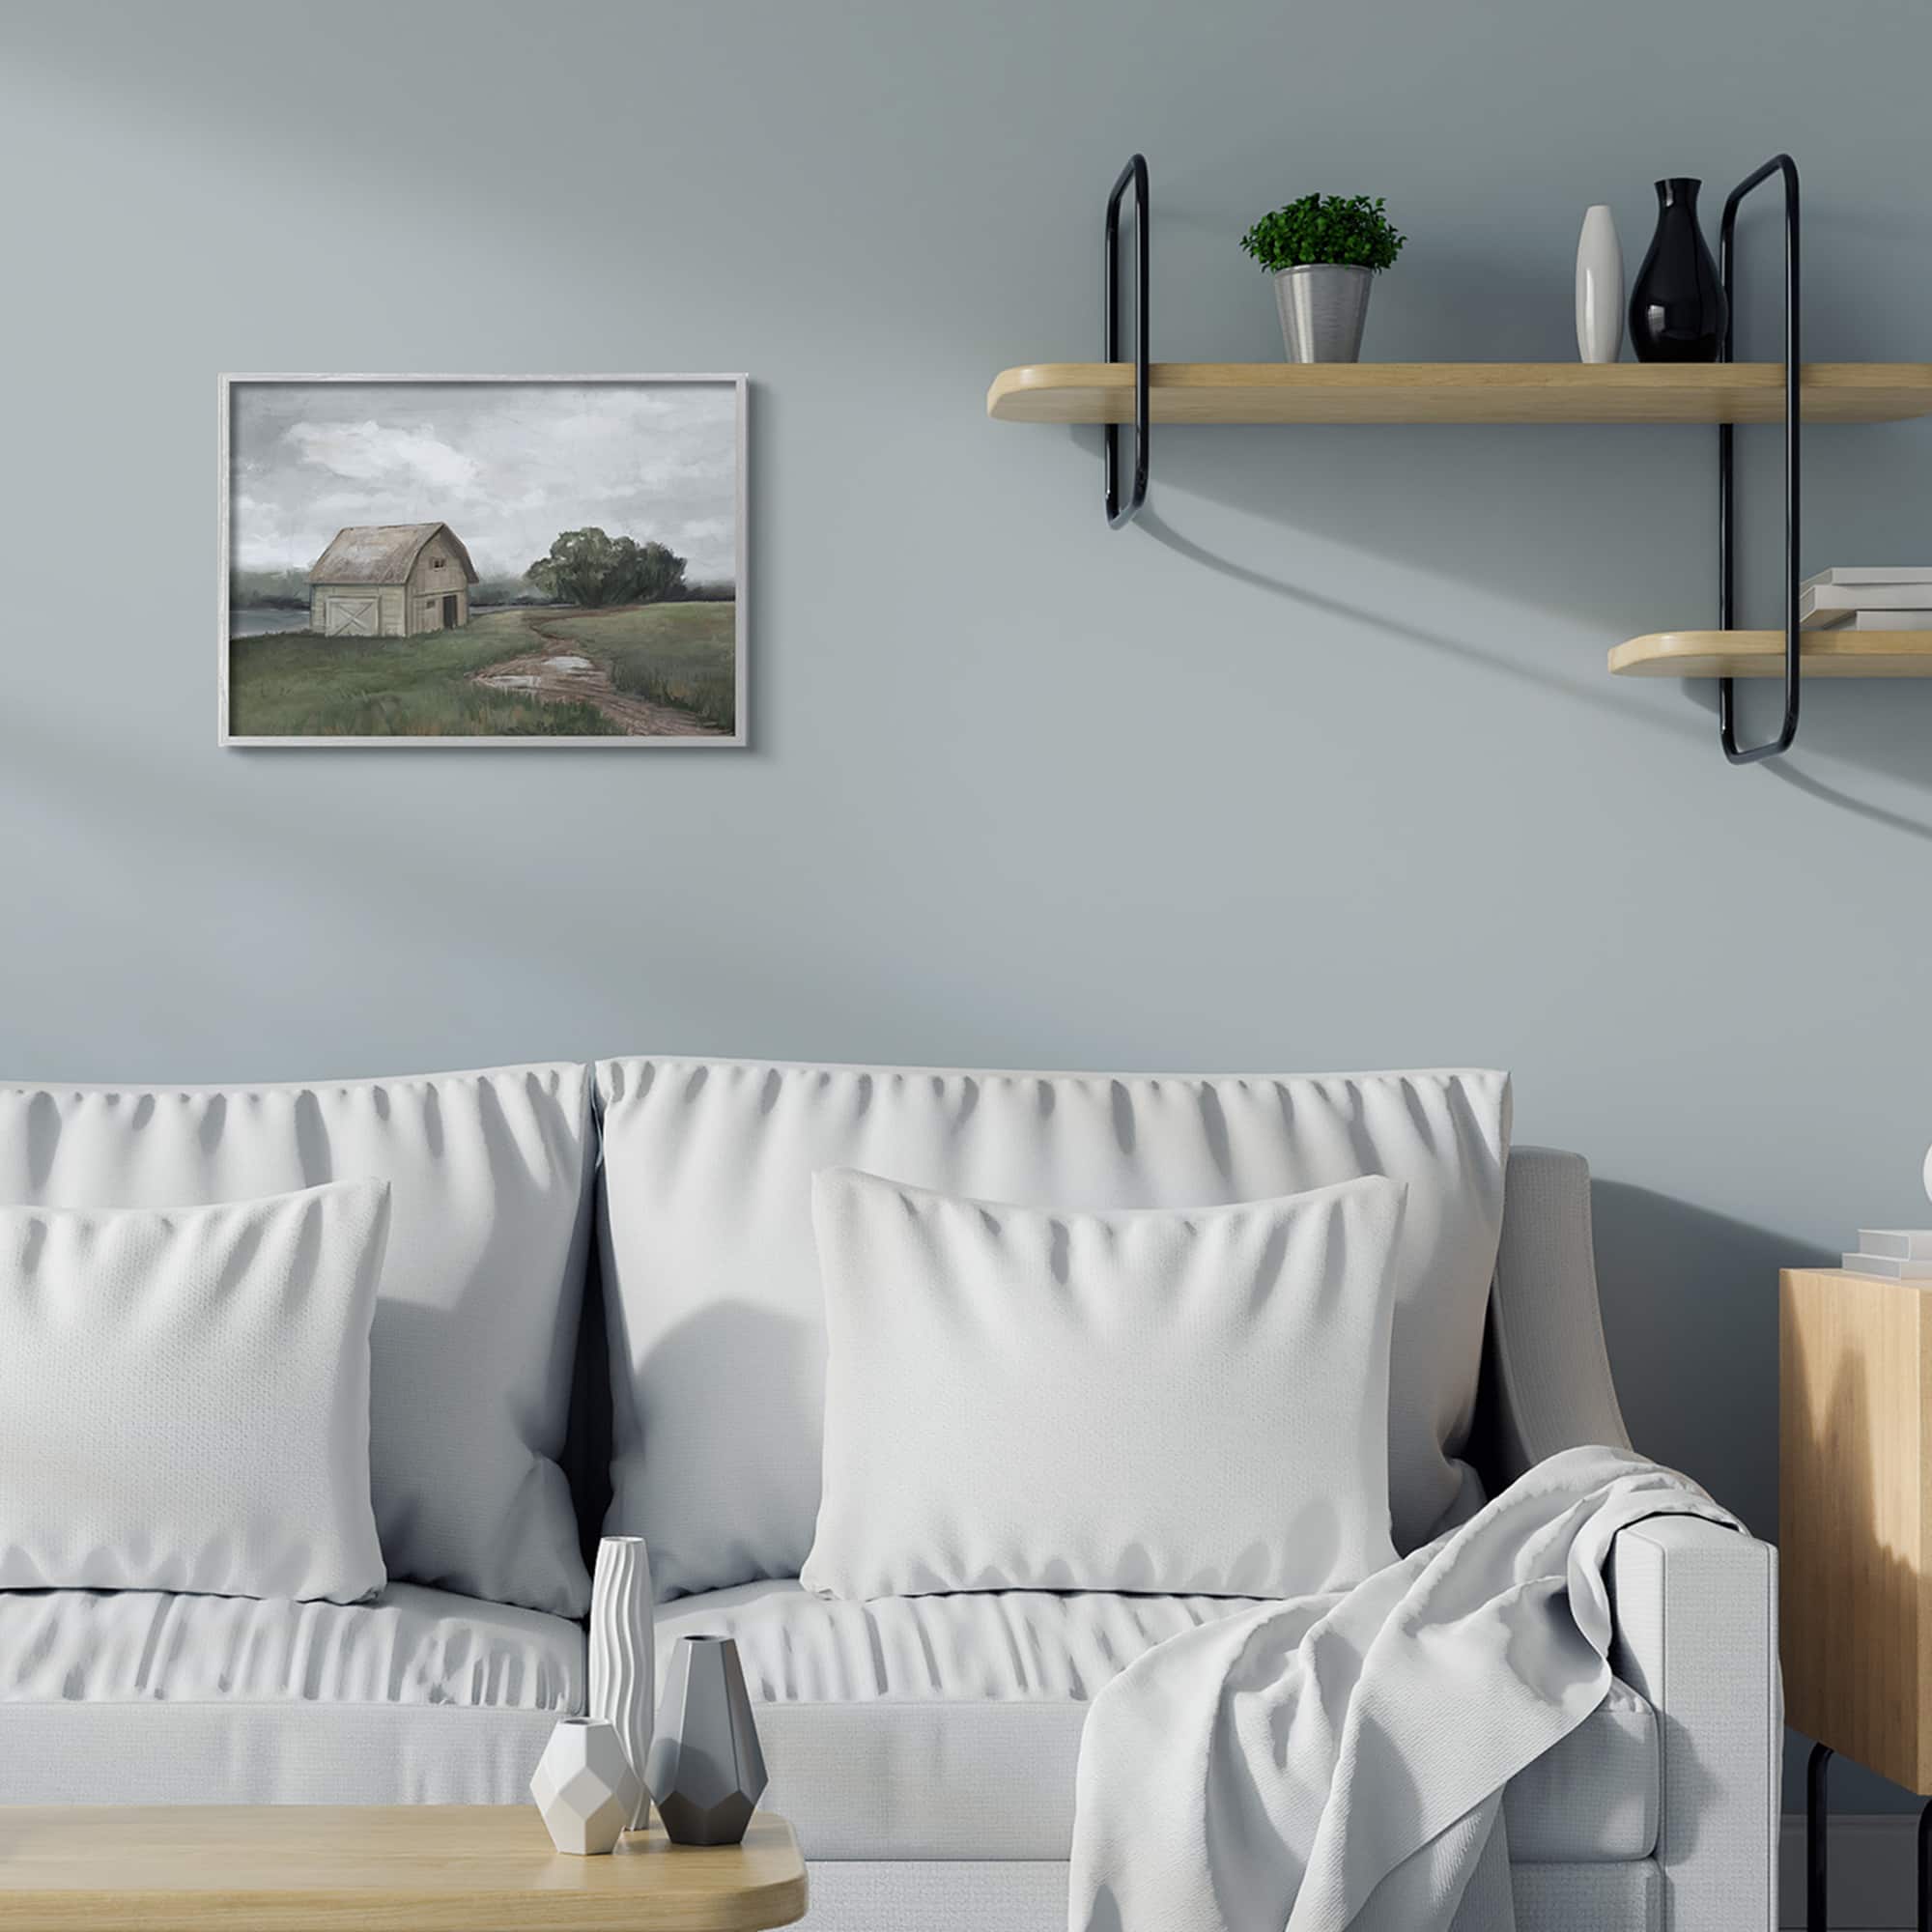 Stupell Industries Cloudy Barn Wall Art in Gray Frame